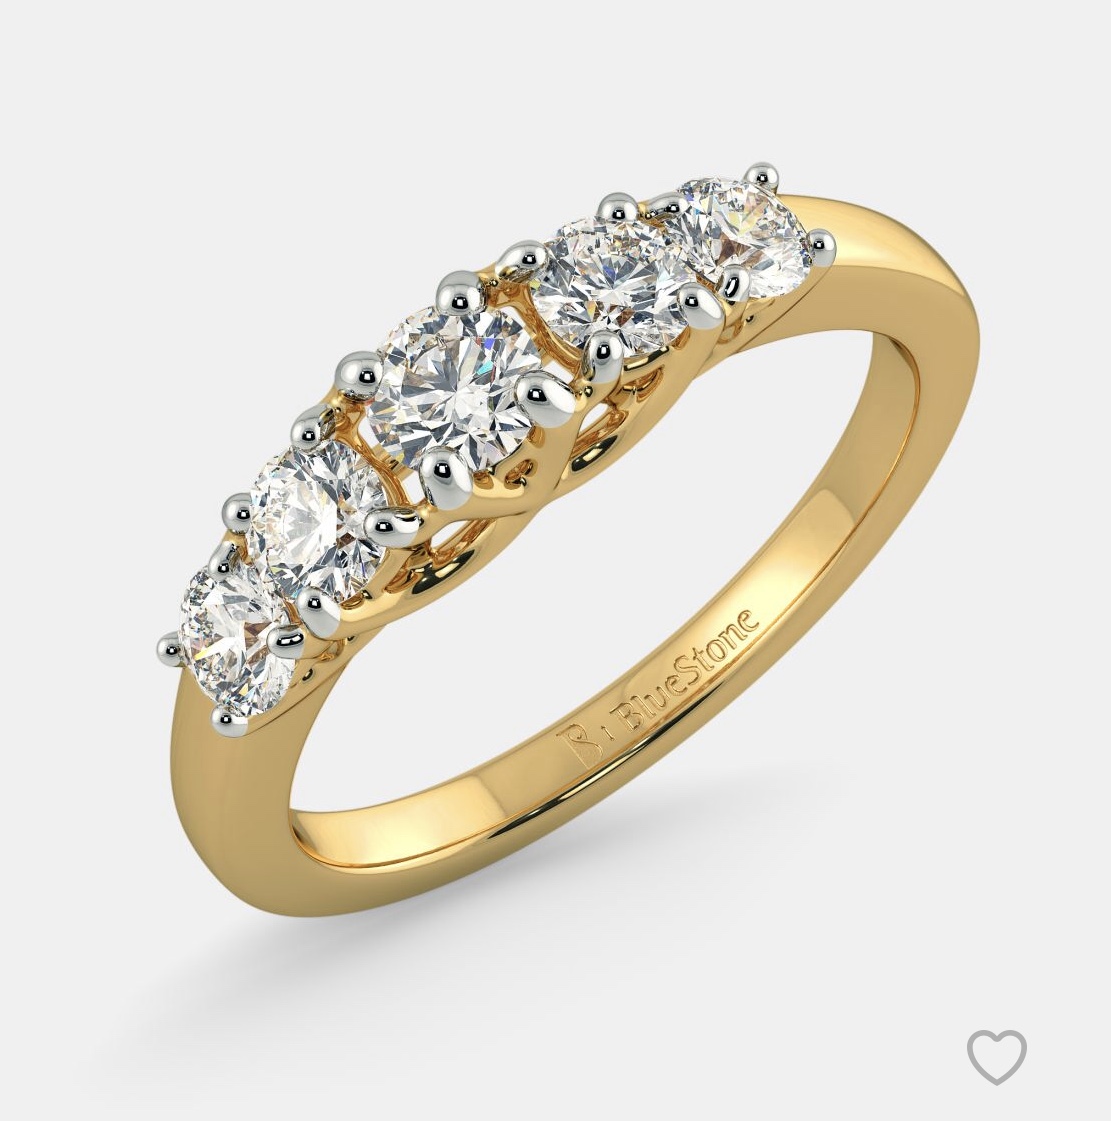 The olympius ring | SEHGAL GOLD ORNAMENTS PVT. LTD.